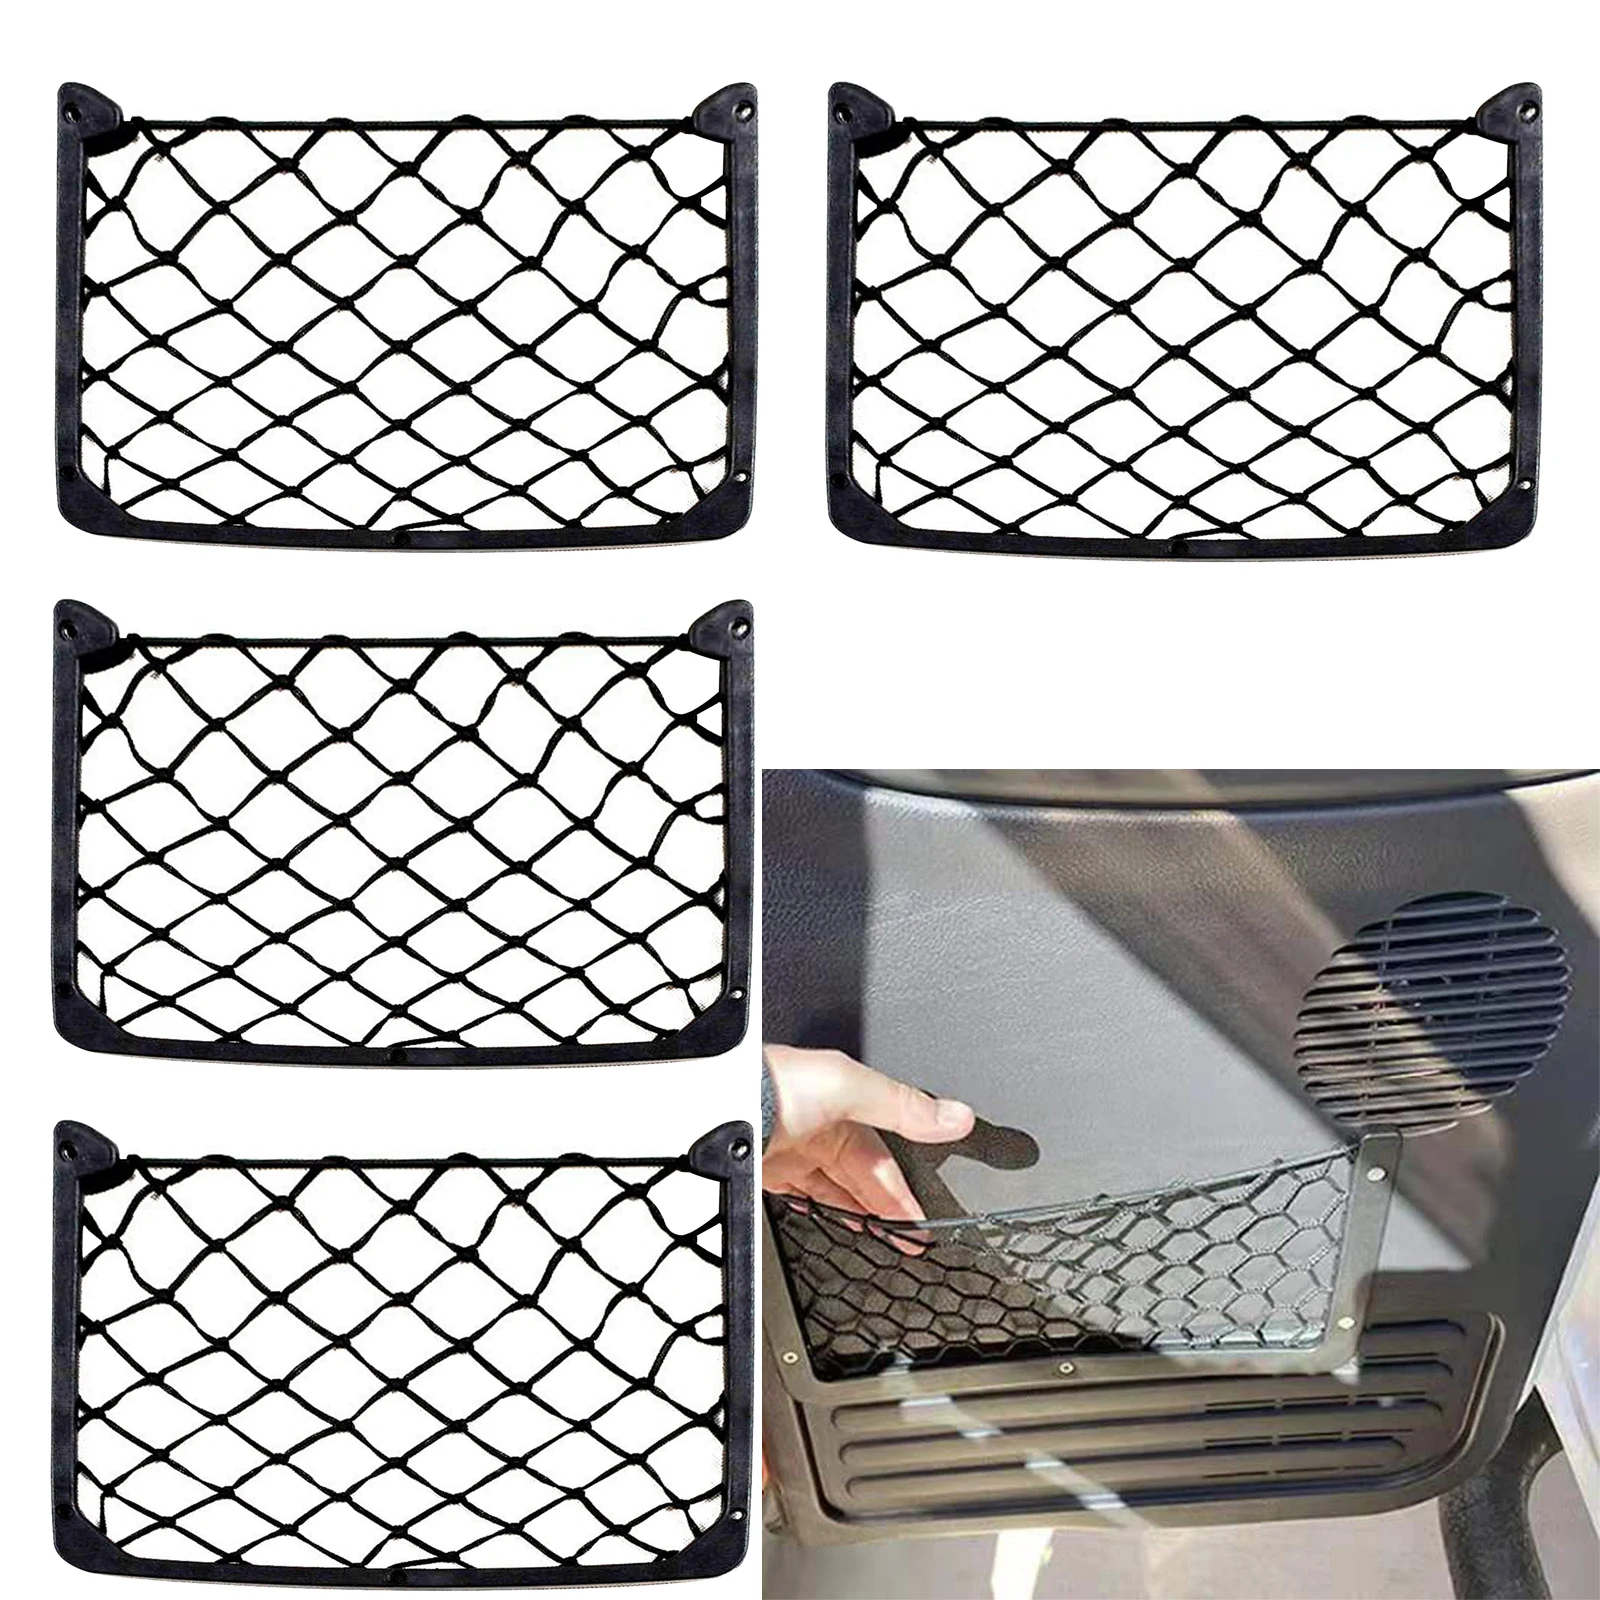 Car Storage Net Large Size ABS Plastic Netting Bag for Car Frame Stretch Mesh Net Universal Cargo with Screws for RV Car Trunk